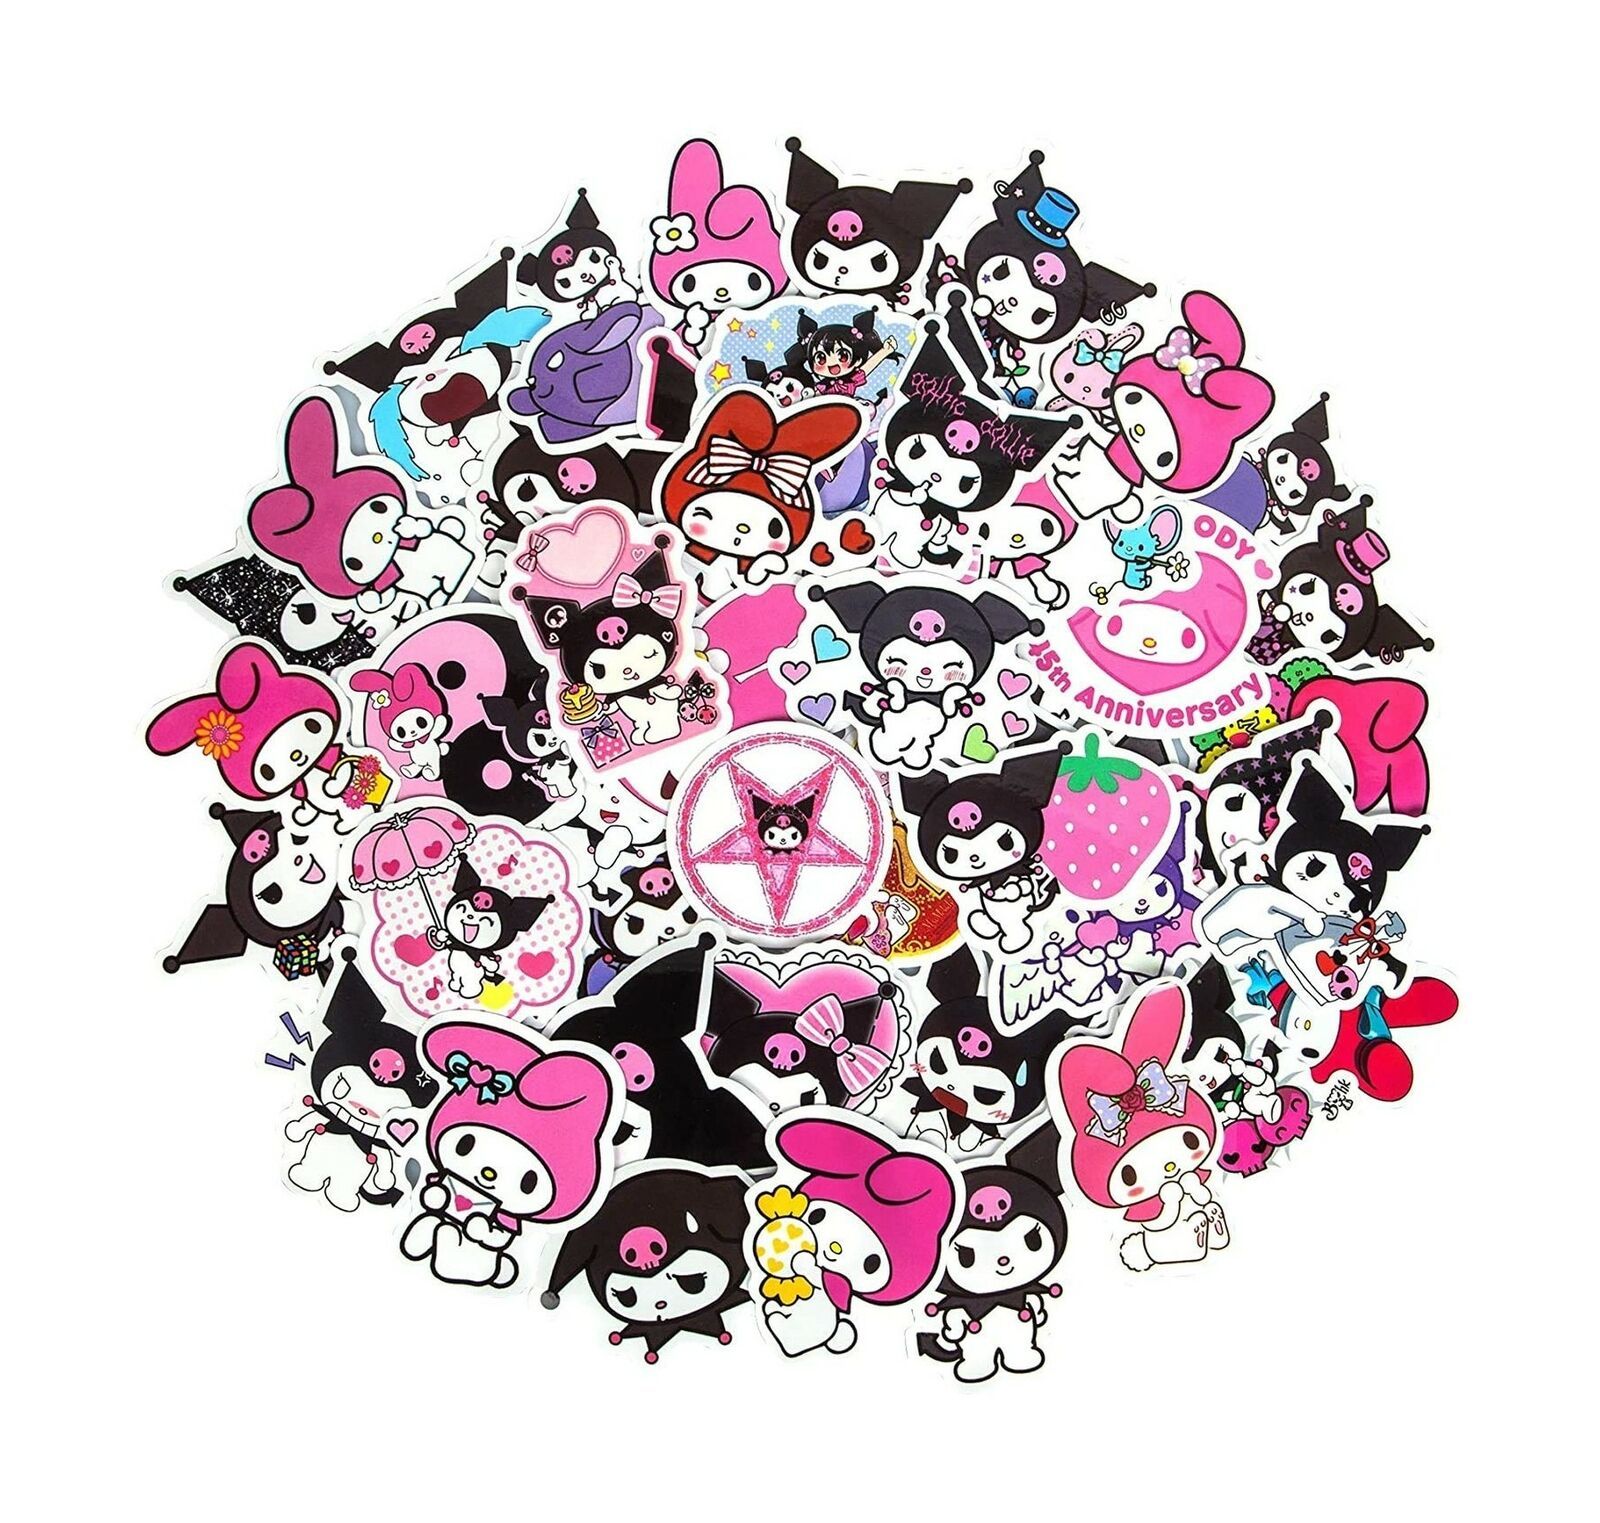 A circle of stickers with various cartoon characters - Kuromi